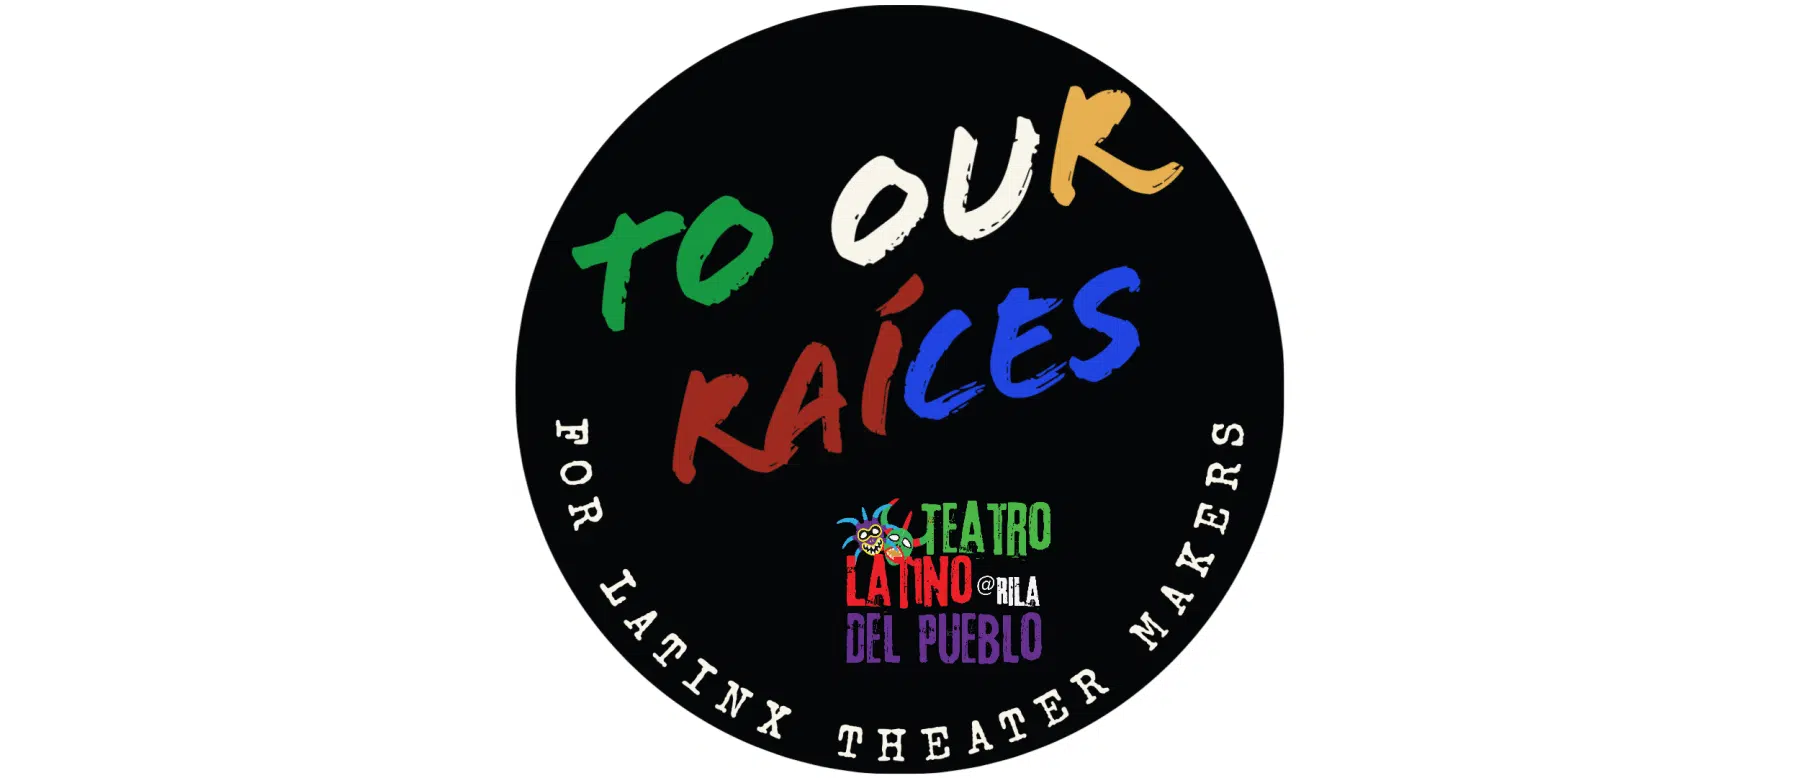 Rhode Island Latino Arts announces weekly pláticas about Latinx experience